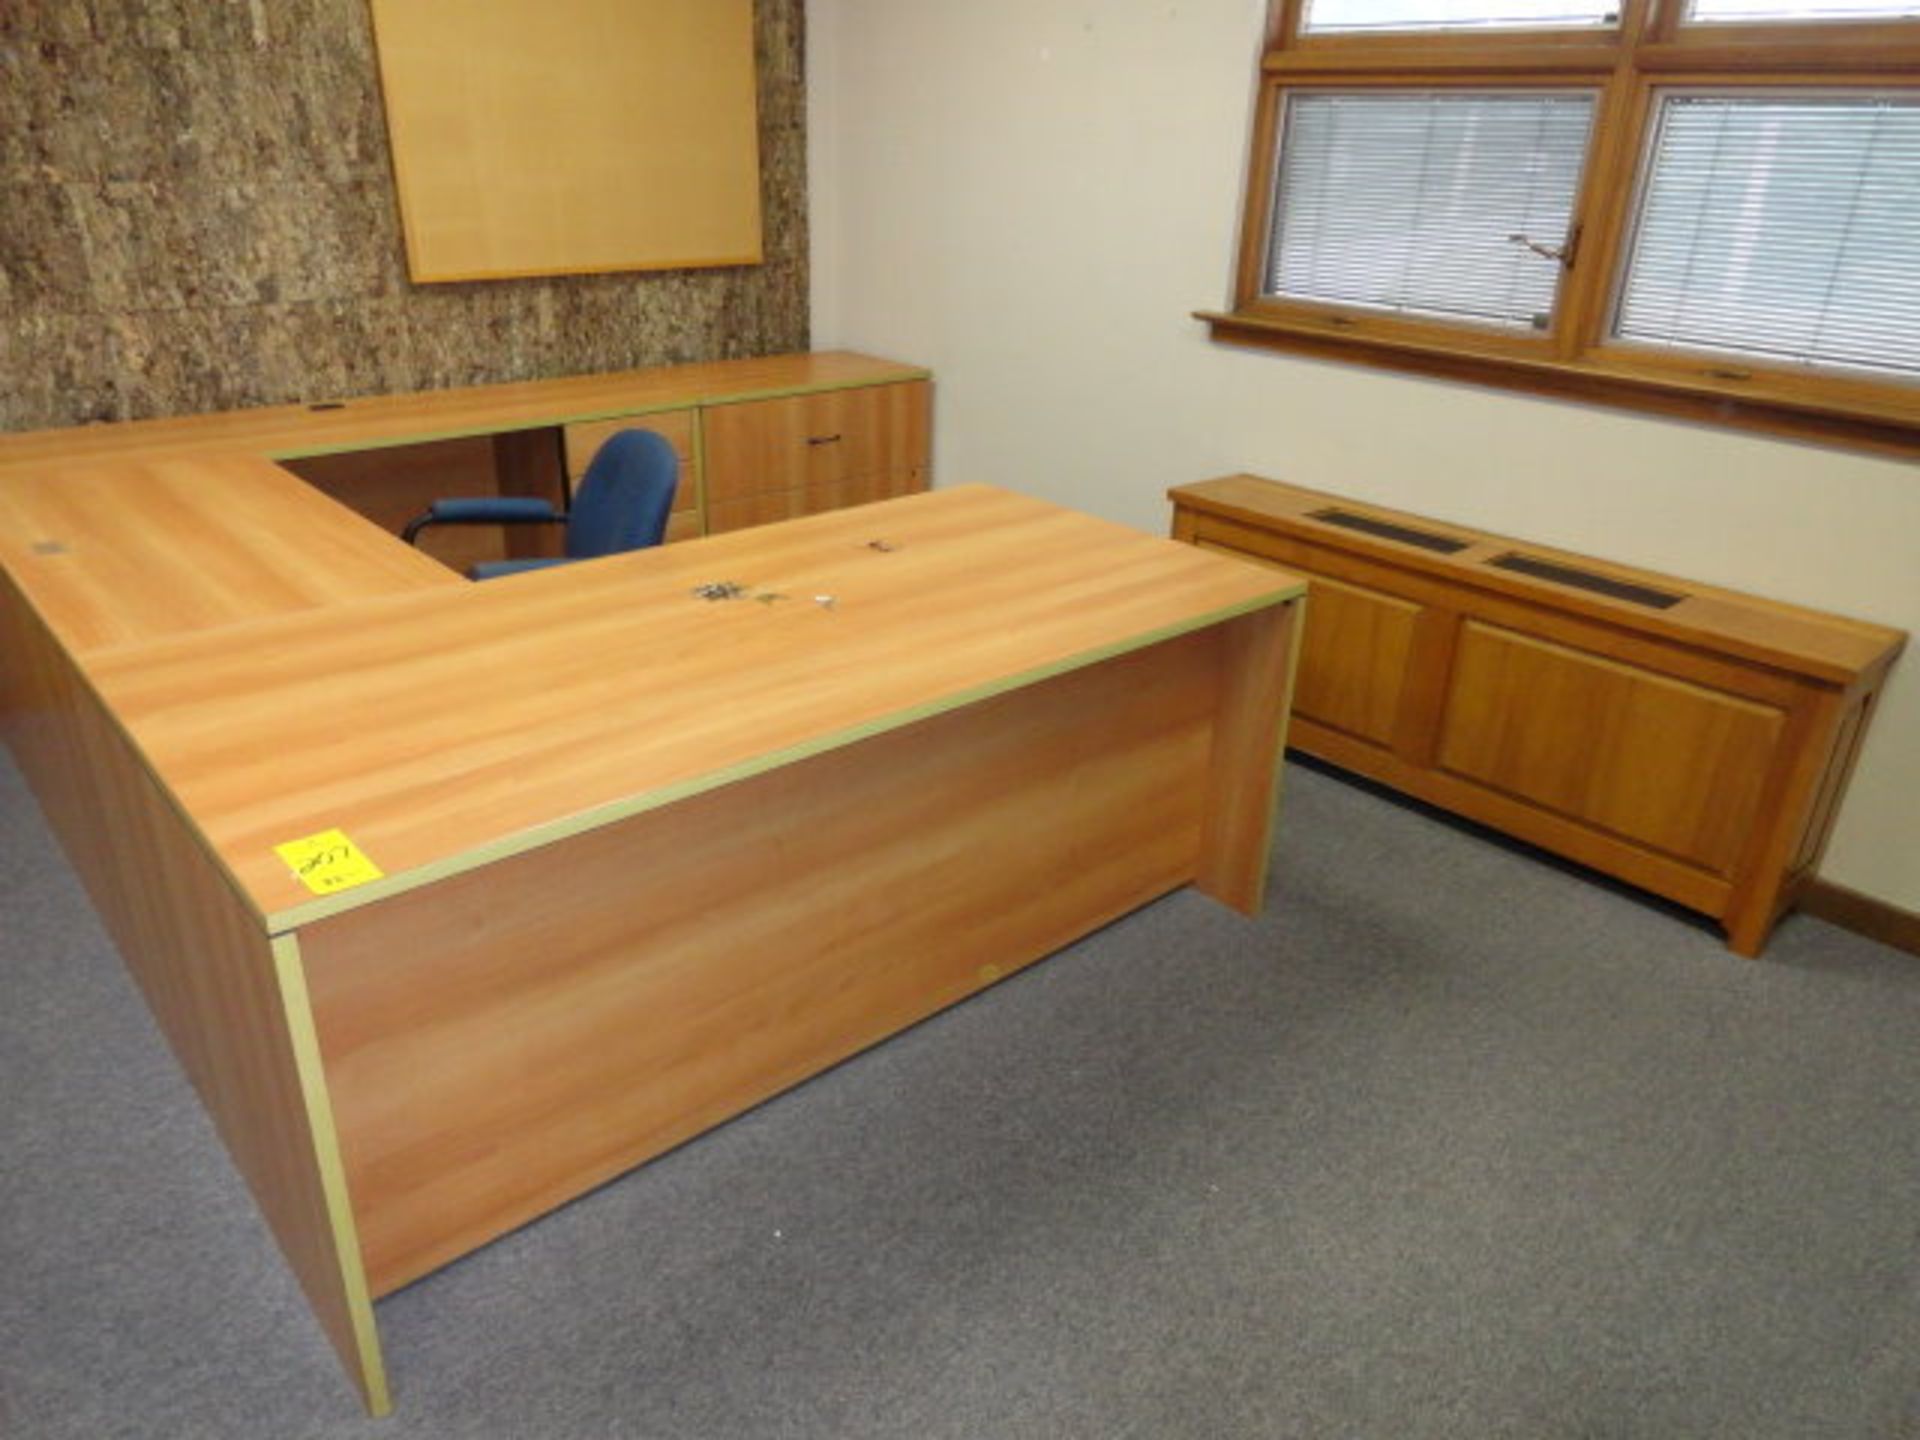 Contents of Office: Wood 'U' Shaped Desk, 104" w x 9' with chair, ($240.00 Required Loading Fee-